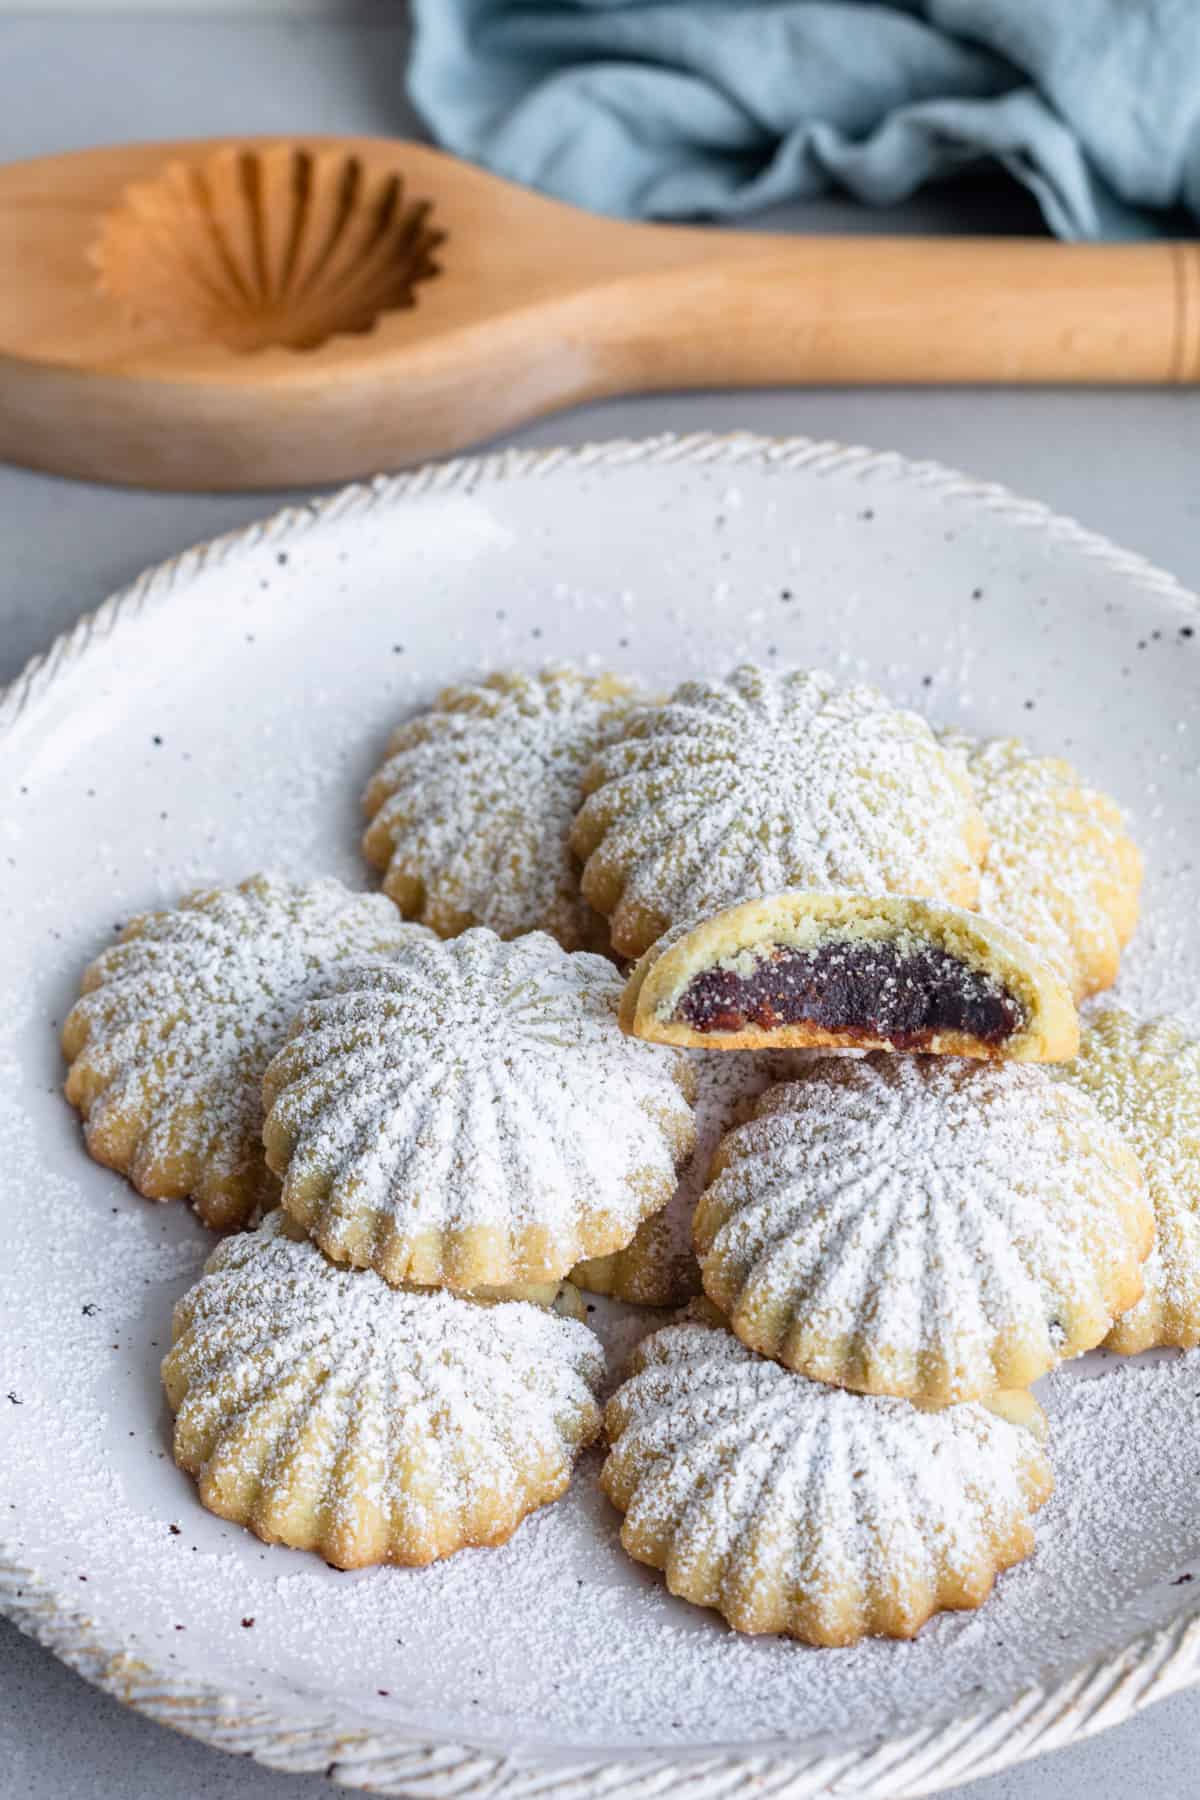 Date paste filled maamoul cookies on a plate with one split open to show inside, dusted with powdered sugar.